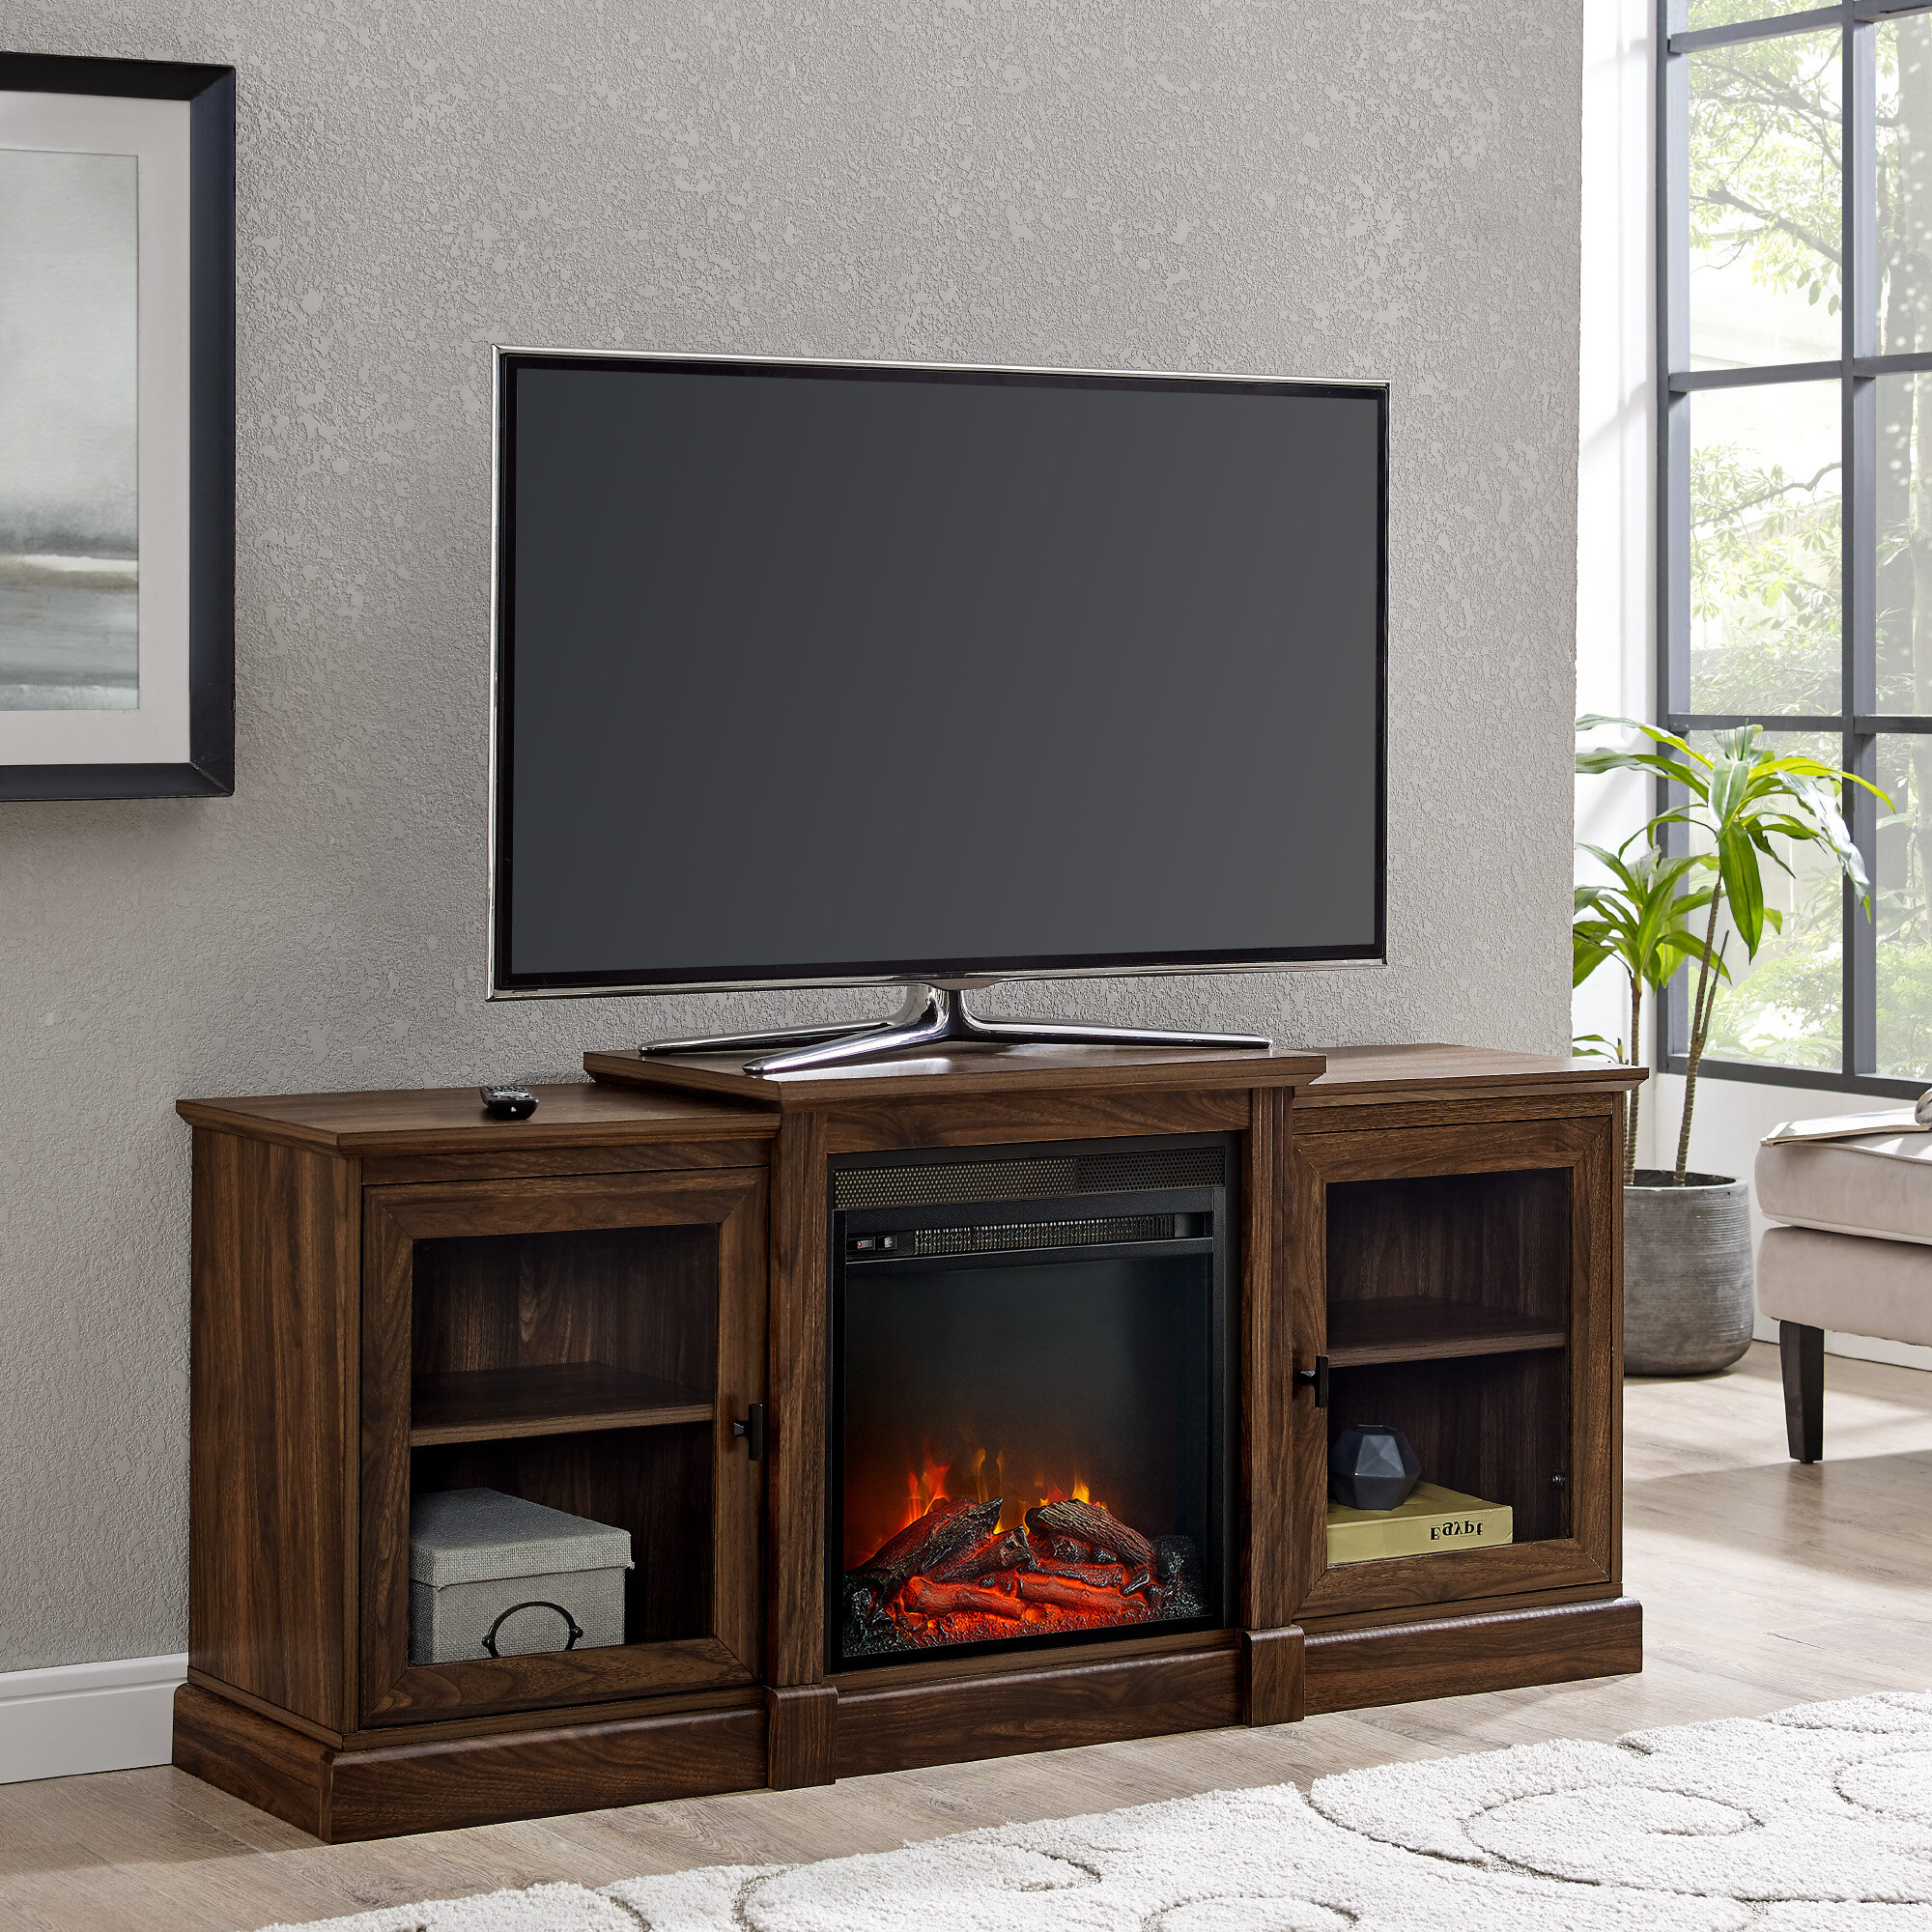 Winterville TV Stand for TVs up to 65" with Fireplace Included